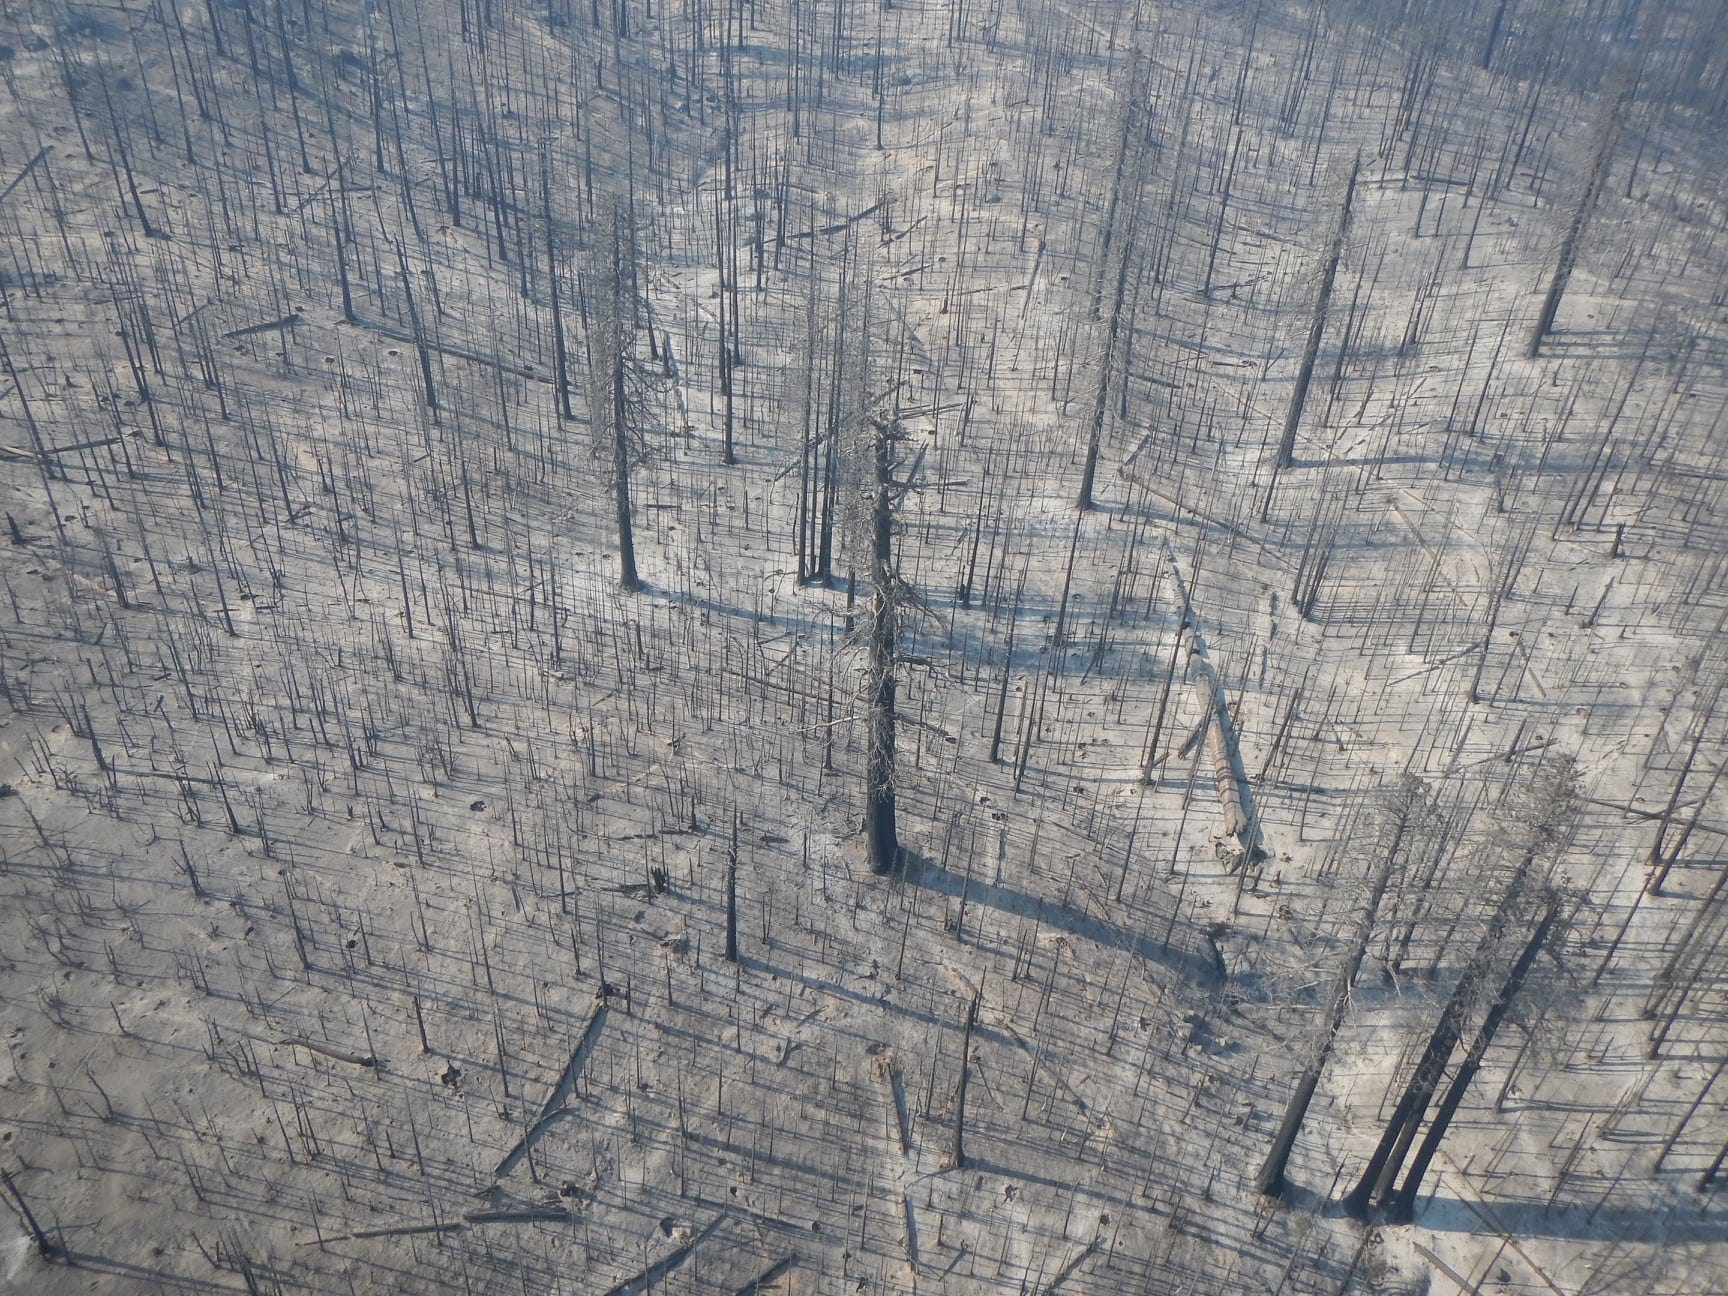 The high-severity Castle Fire burned through the Freeman Creek Grove of giant sequoia.